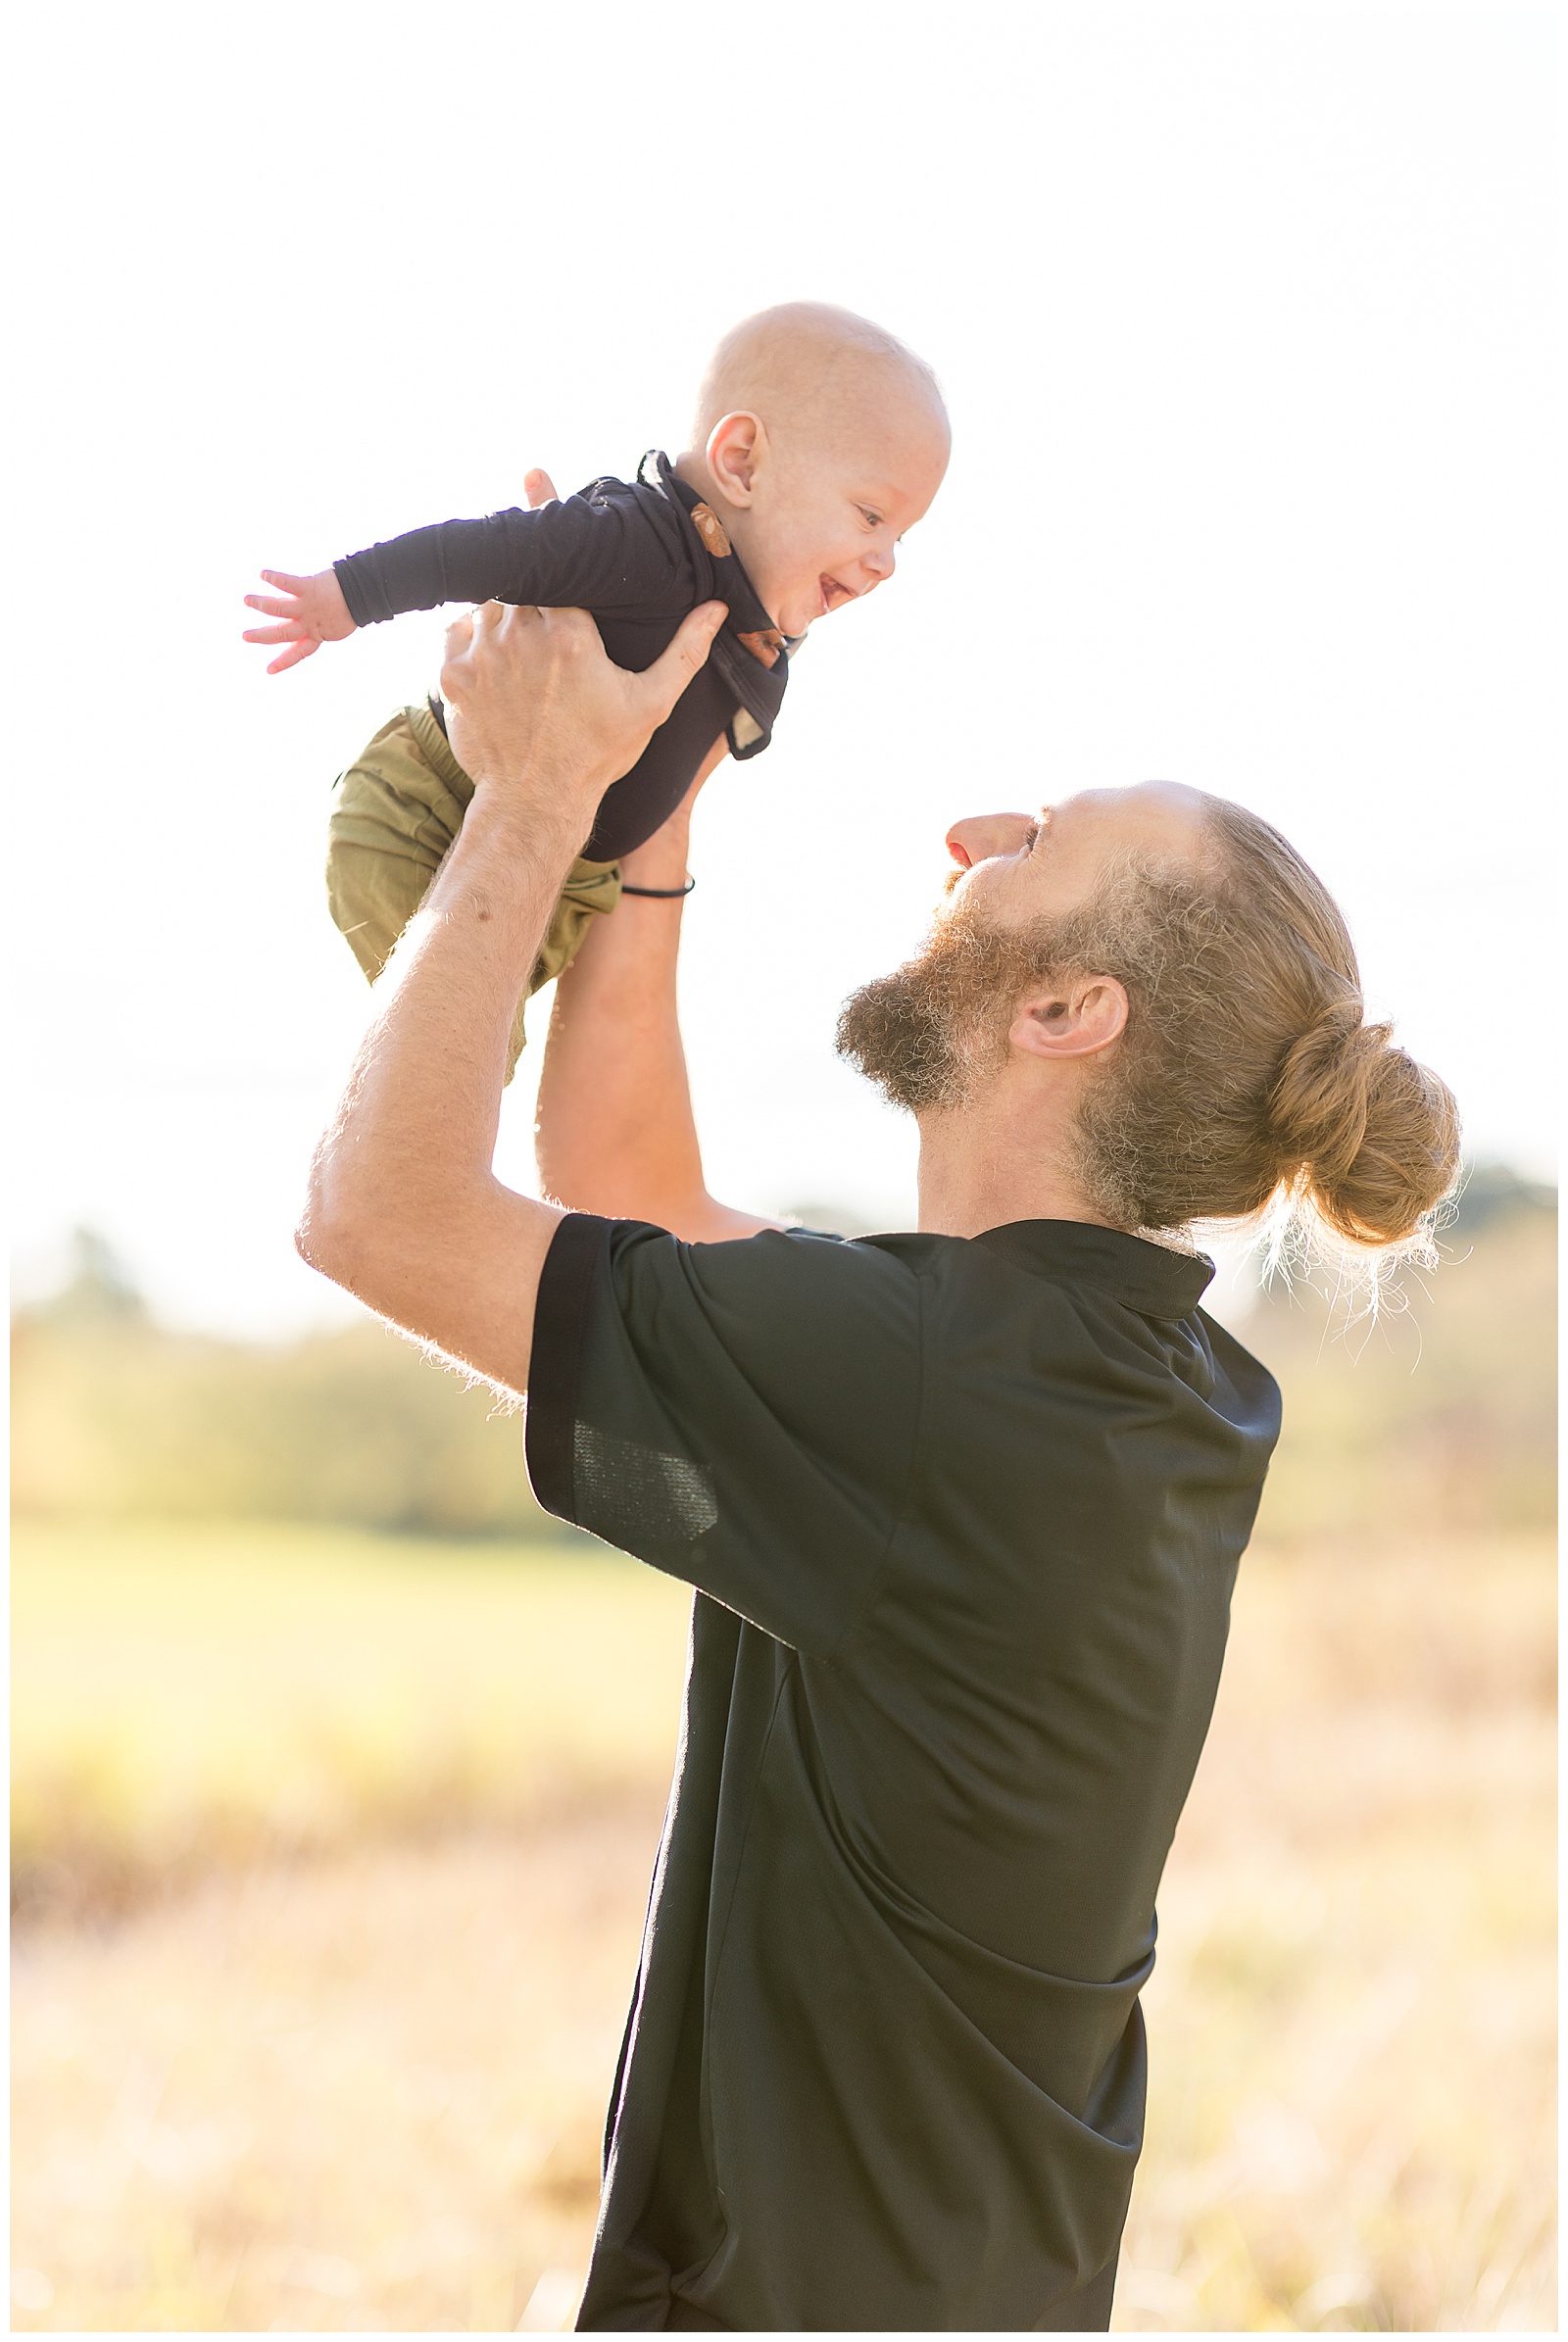 Dad, who has blonde hair and wears it in a bun, has on a black shirt and holds his baby boy up in the air as they smile at each other, both wearing black shirts.